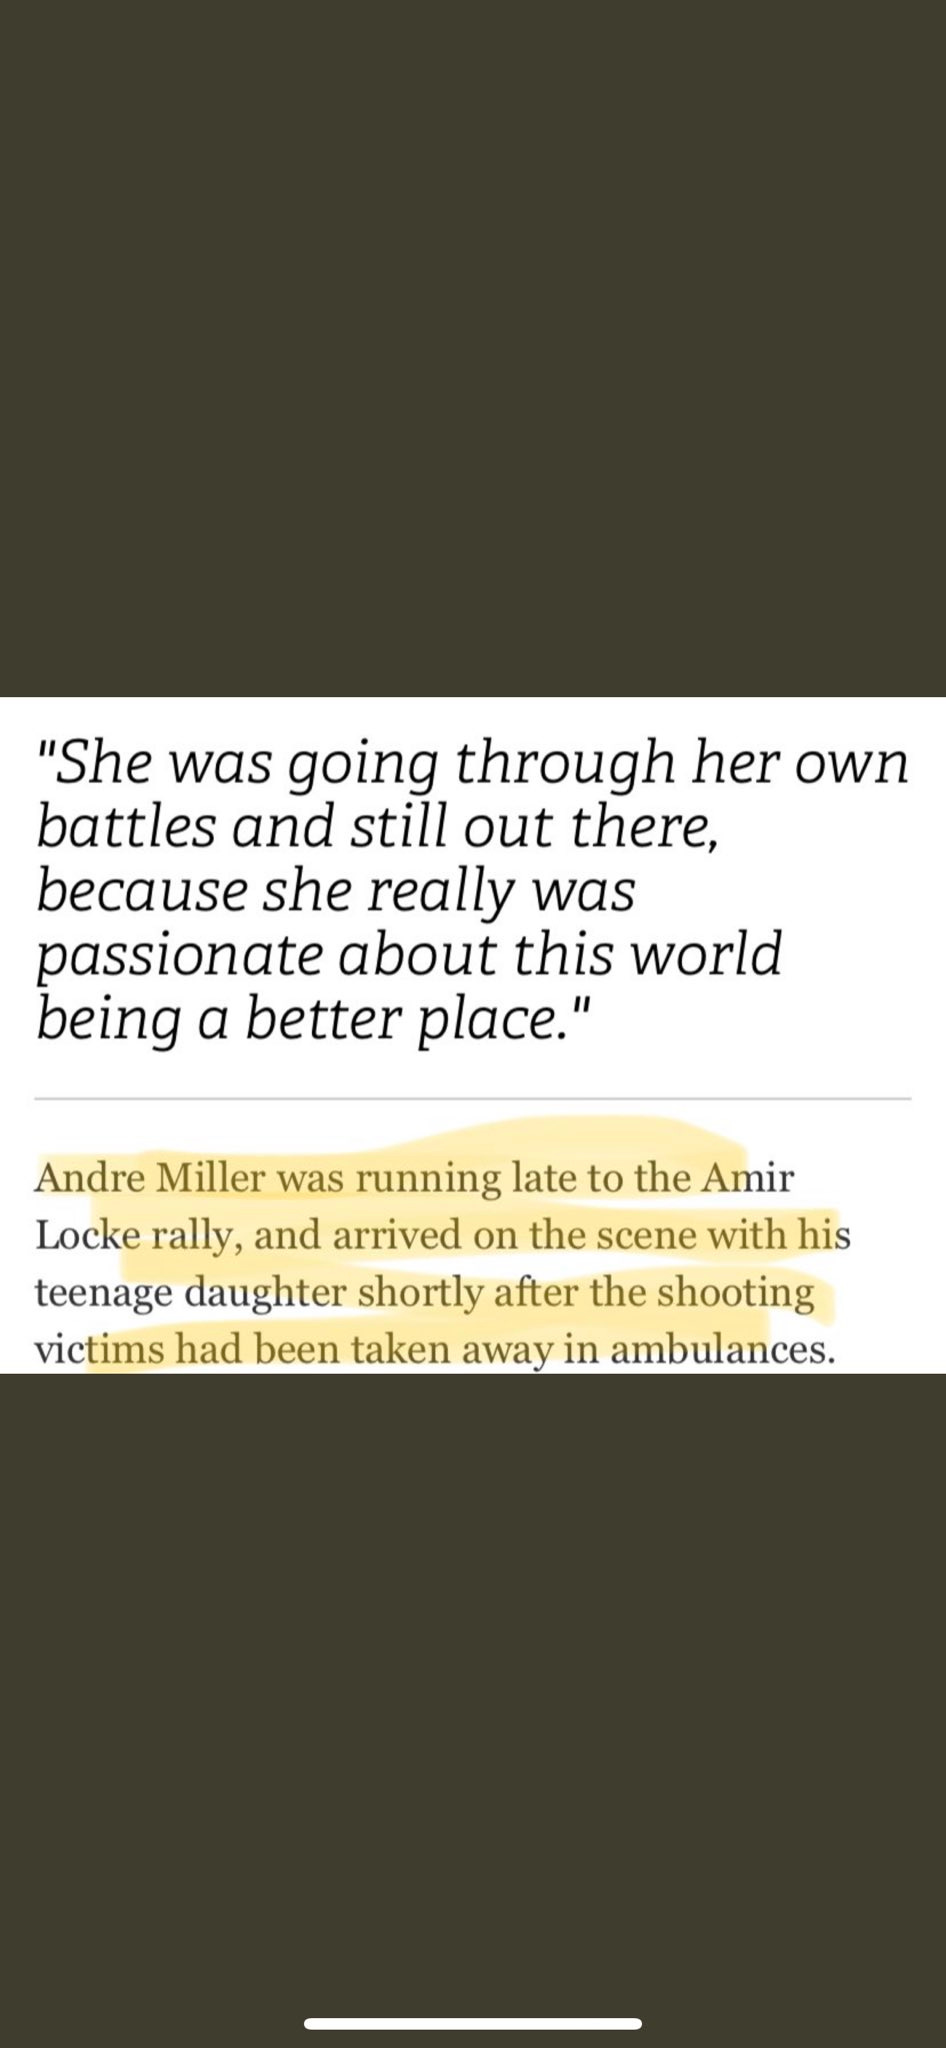 Title reads “she was going through her own battles and still out there, because she really was passionate about this world being a better place.” 

Text under it reads “Andre Miller was running late to the Amir Locke rally, and arrived on the scene with his teenage daughter shortly after the shooting victims had been taken away in ambulances.”